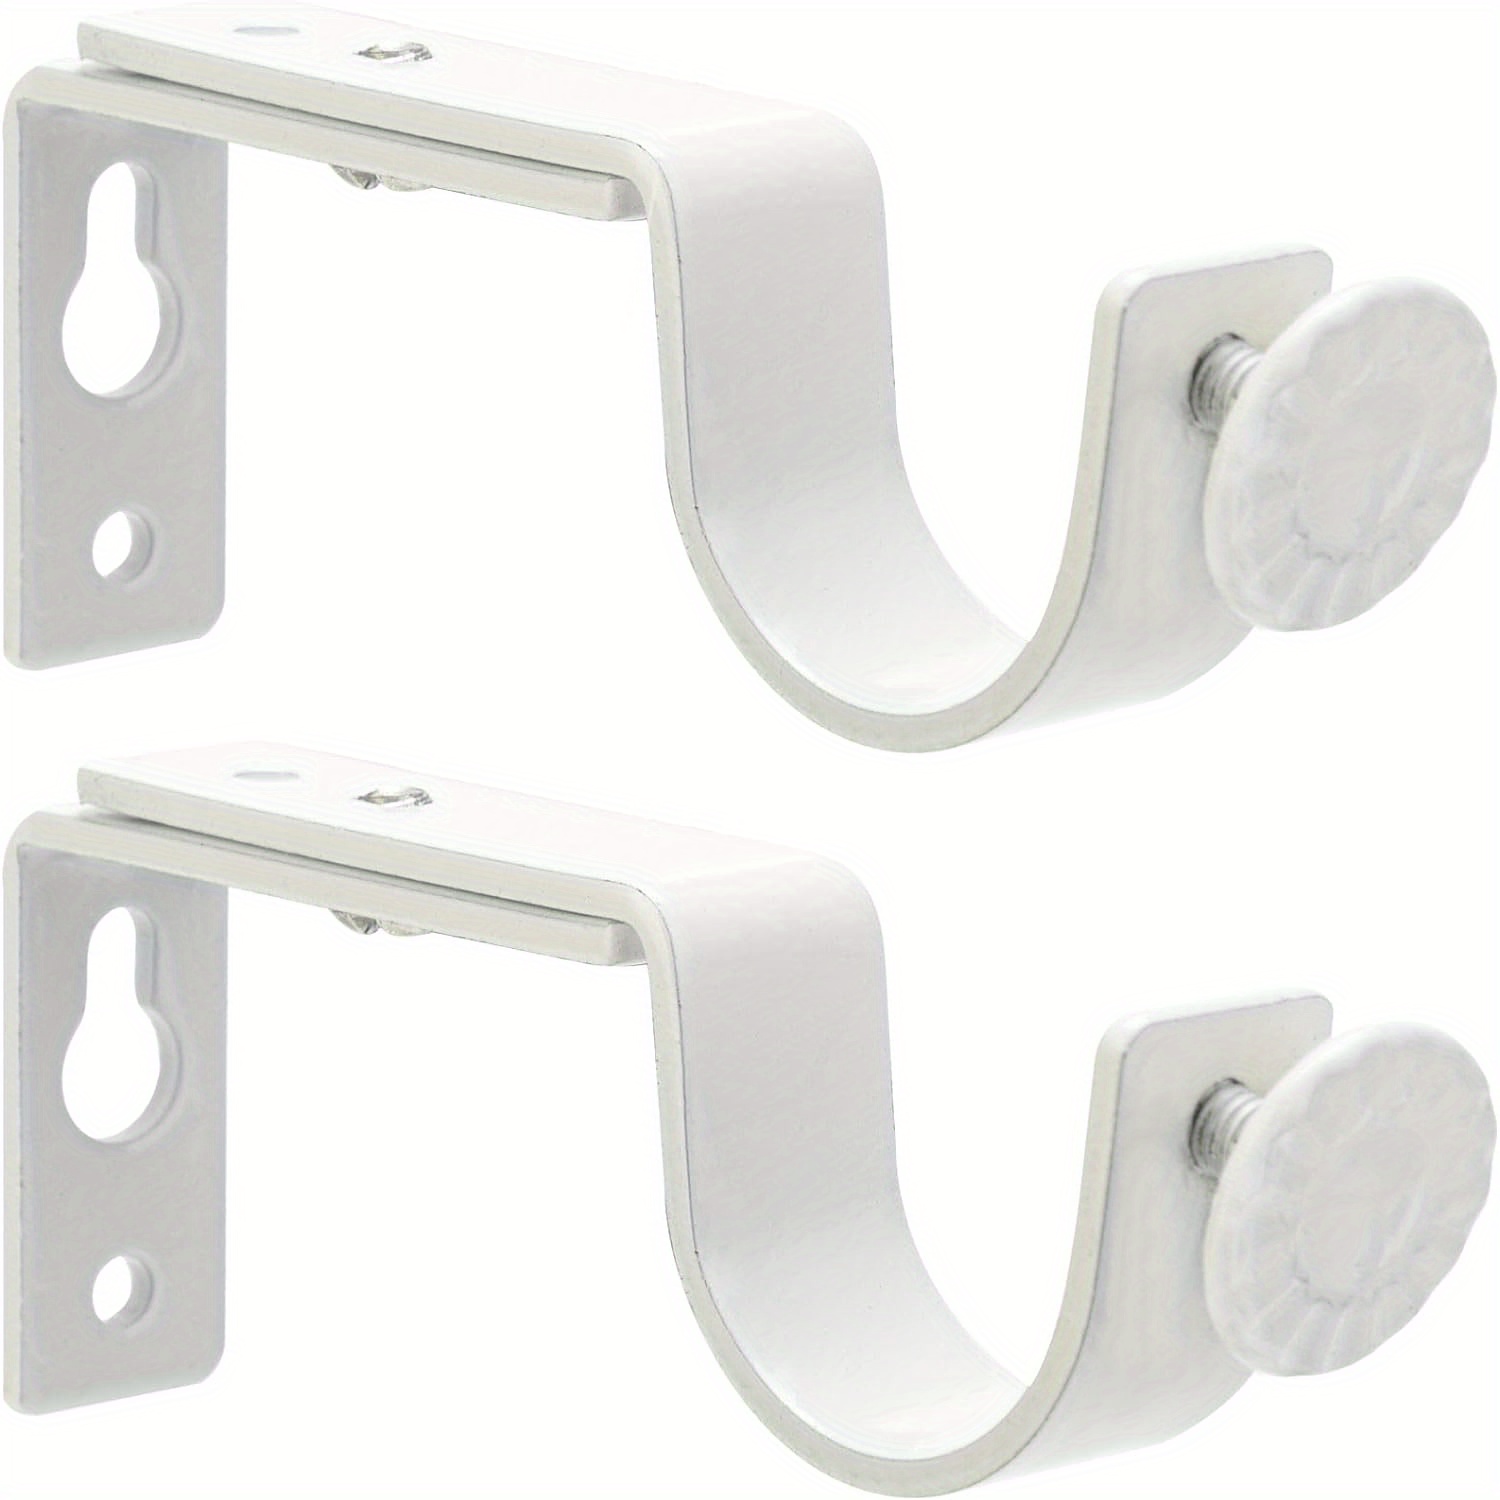 2pcs Curtain Rod Holders, Heavy Duty Curtain Rod Brackets Fits Up To 1 Inch  Curtain Rod, Rod Holders Hardware Rod Support Hanger, White Hooks For Curt